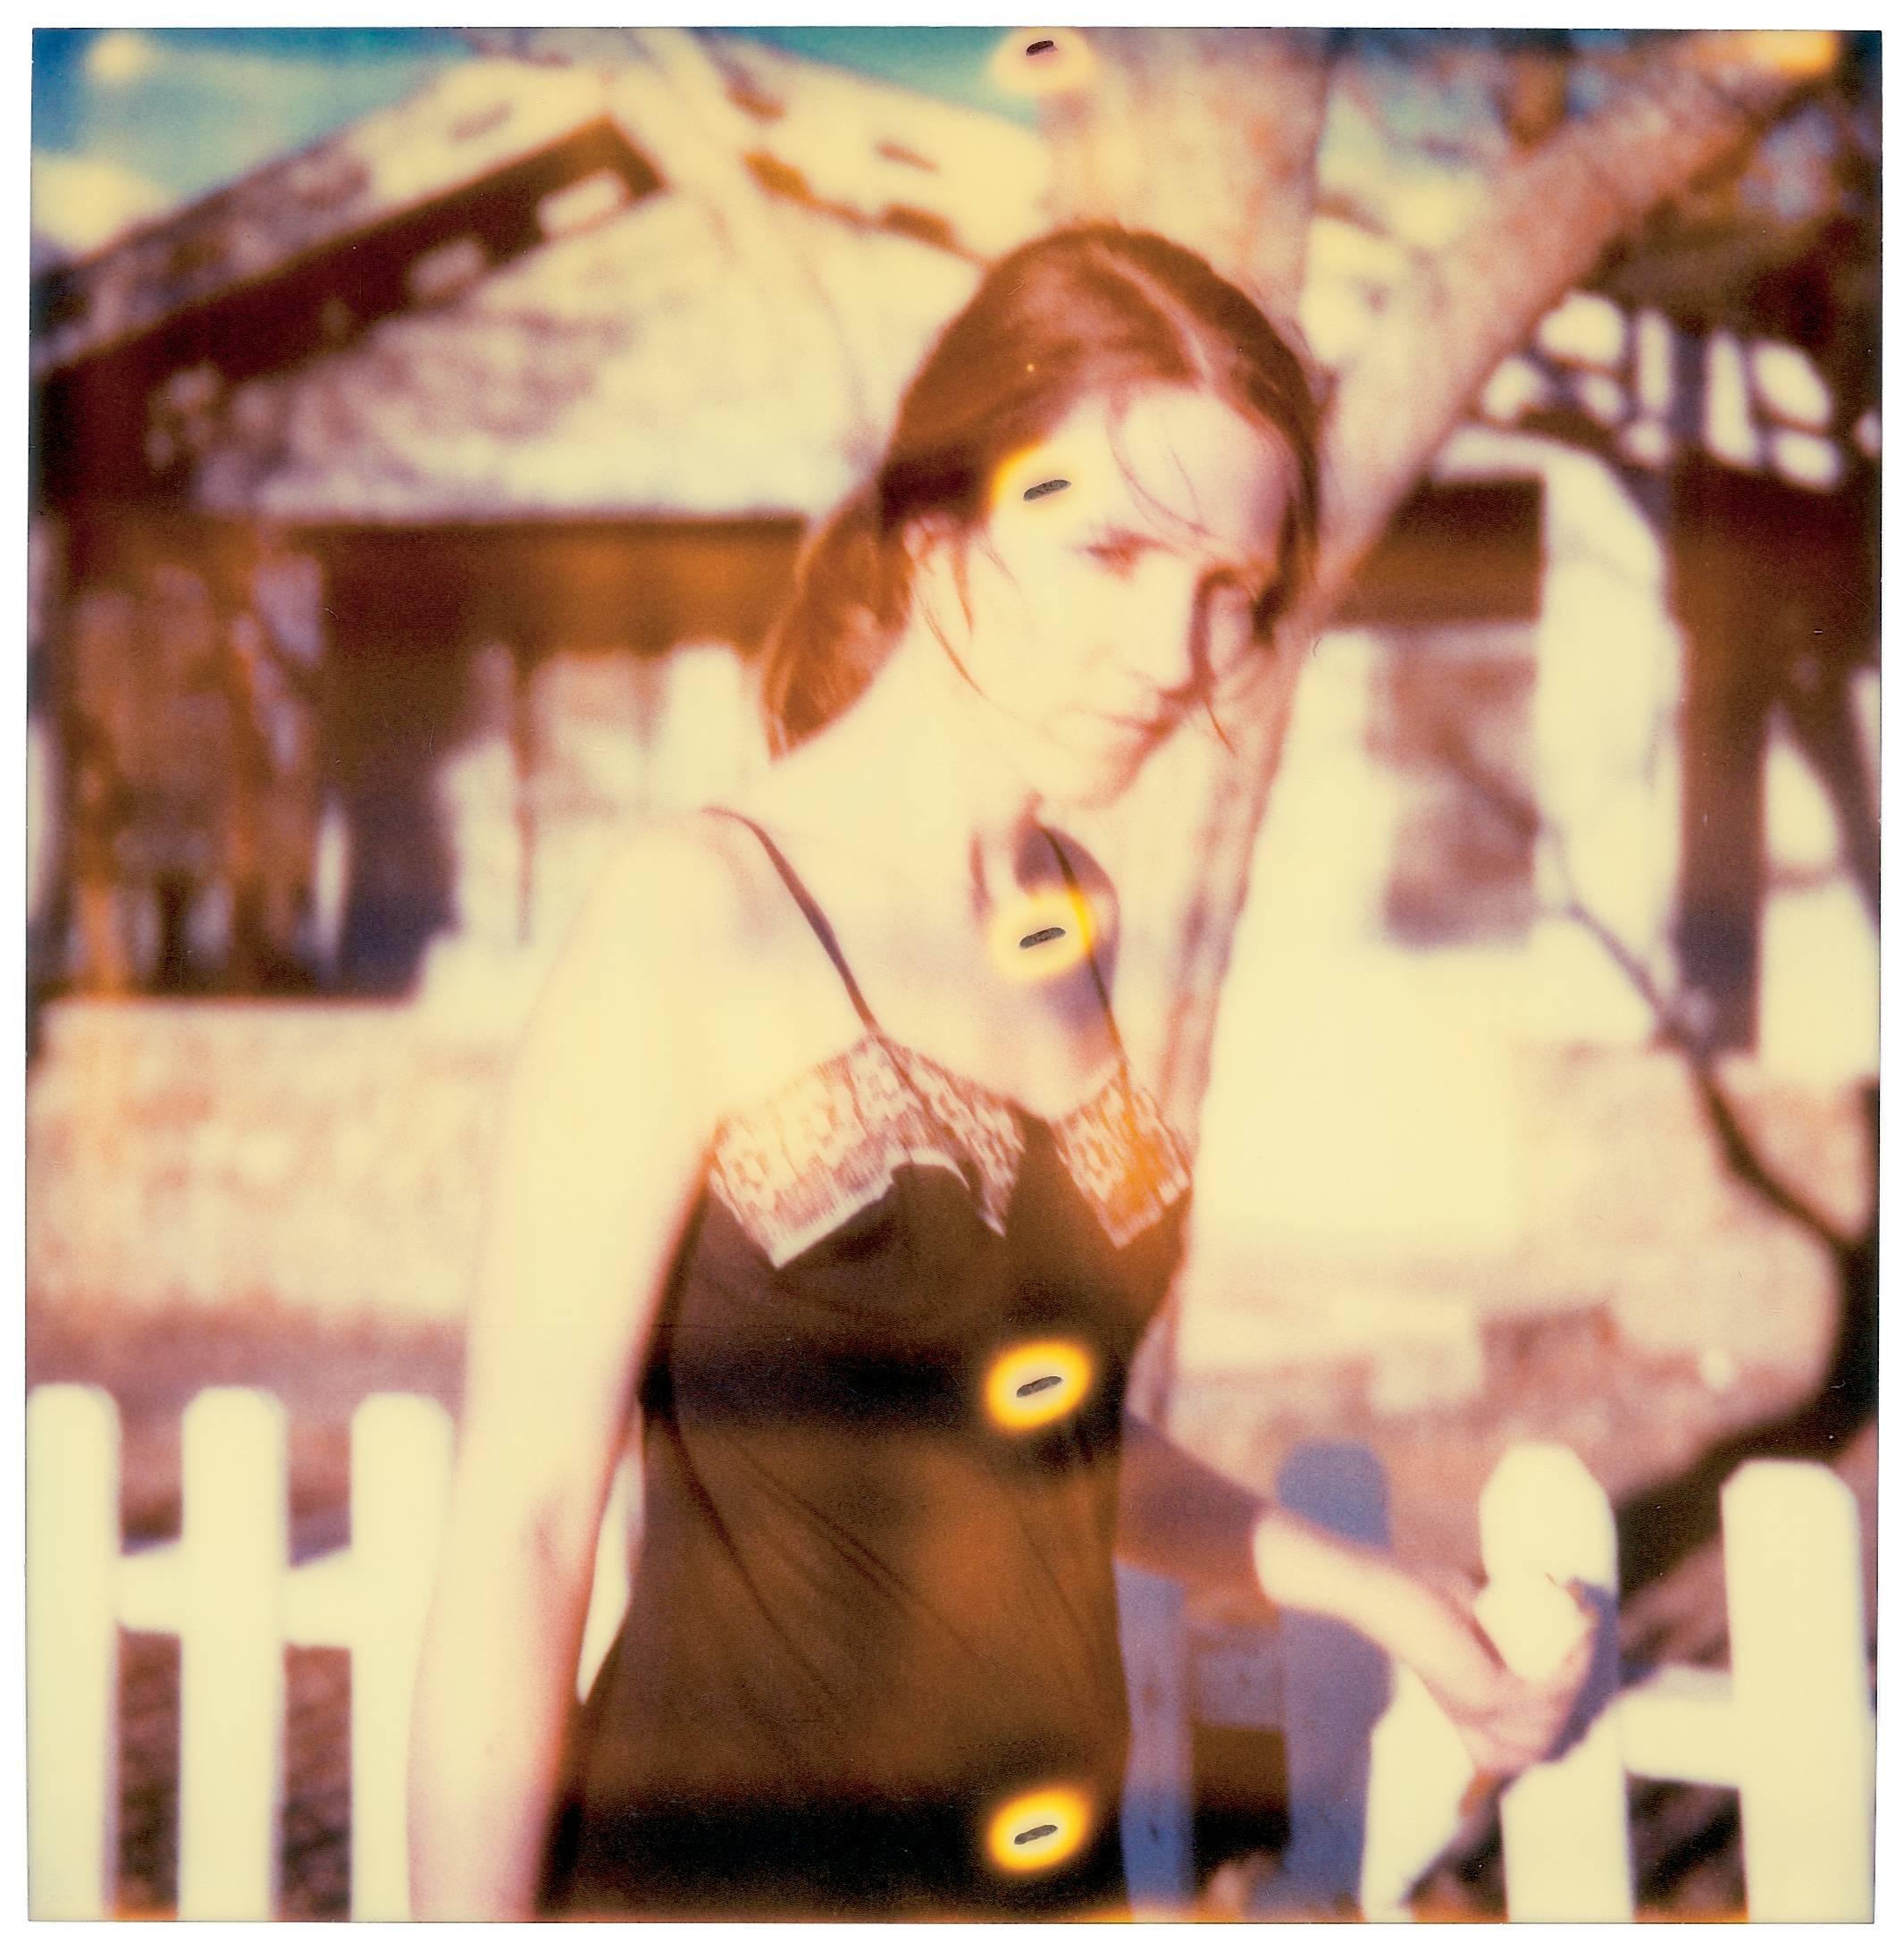 Girl at Fence III (The Last Picture Show), 2005, 58x56cm,
Edition 2/5, analog analog C-Print, hand-printed and enlarged by the artist Stefanie Schneider, based on one of her expired Polaroid photograph creations.
Certificate and Signature